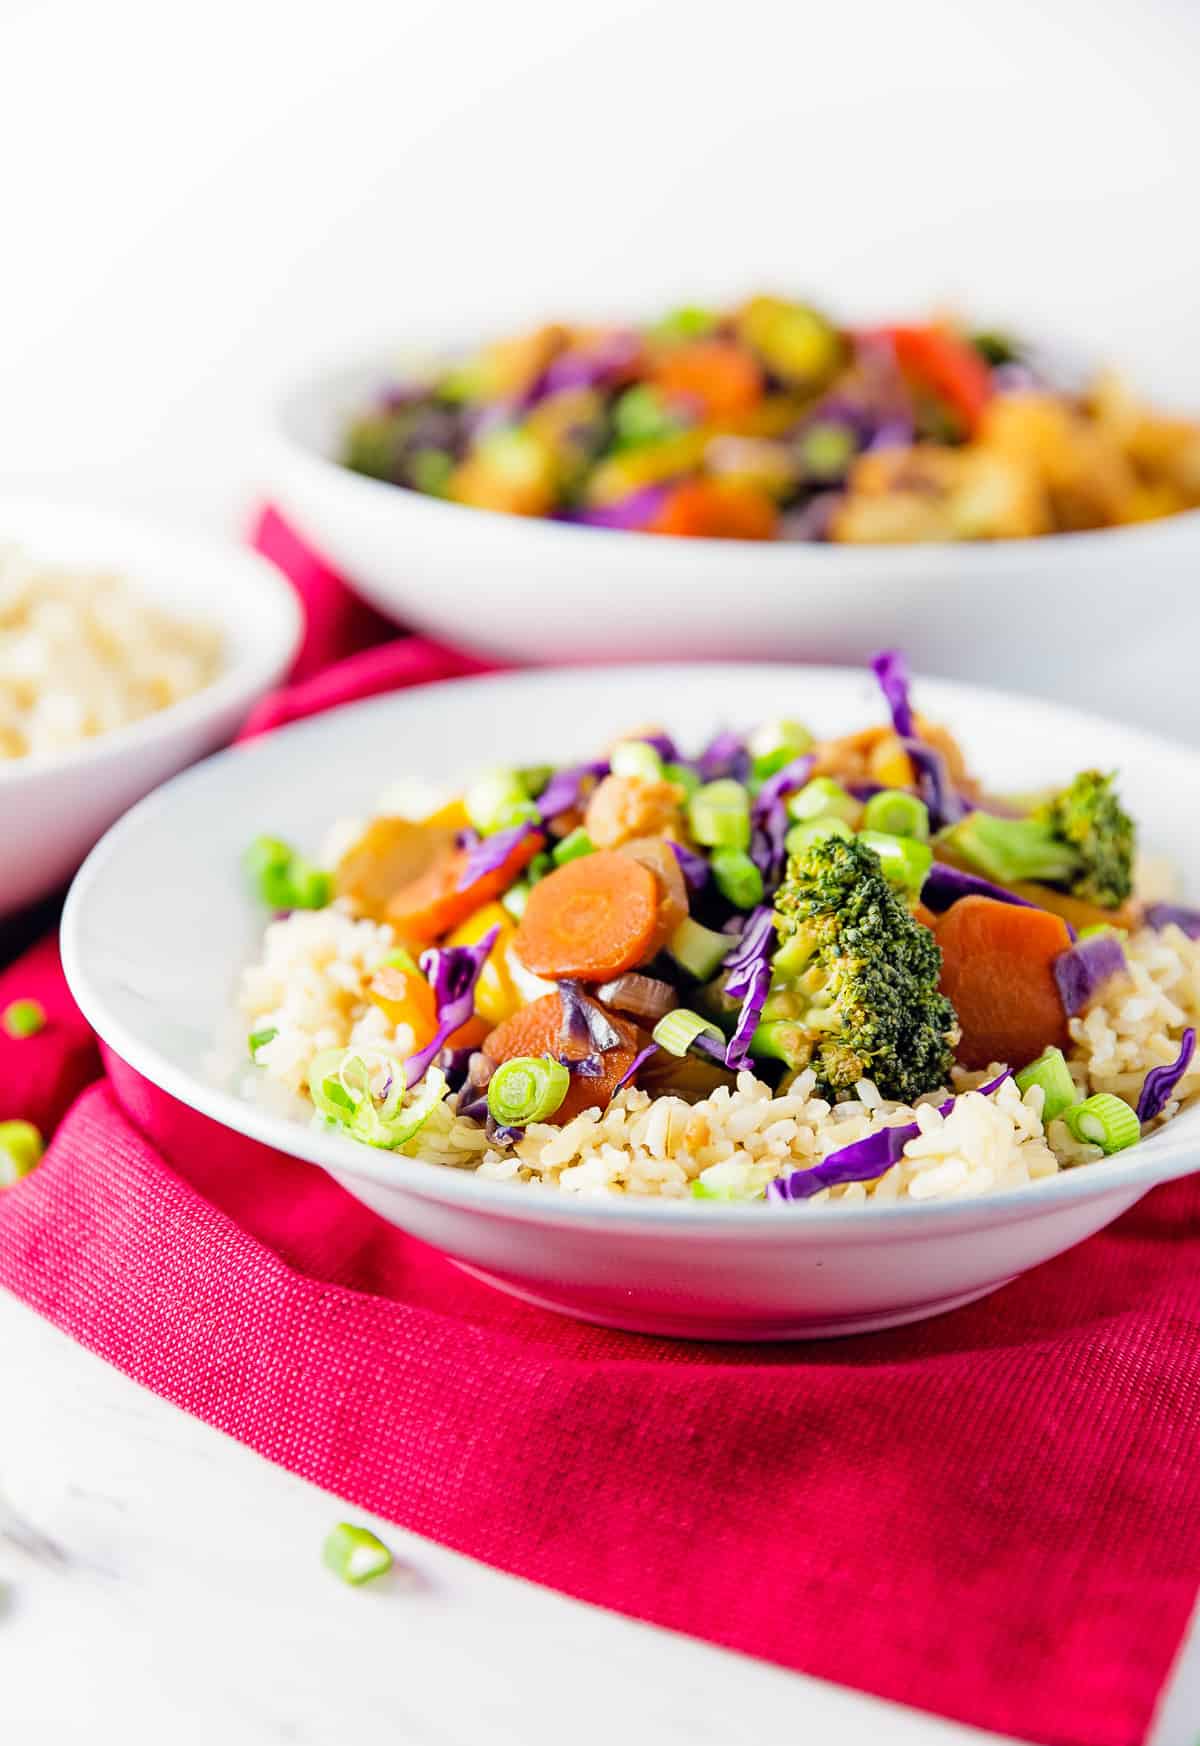 Thai, stir fry, Asian, broccoli, cauliflower, carrots, rice, vegan, vegetarian, whole food plant based, gluten free, recipe, wfpb, healthy, oil free, no refined sugar, no oil, refined sugar free, lunch, dinner, side, sauce, easy, fast, quick, dinner party, entertaining,